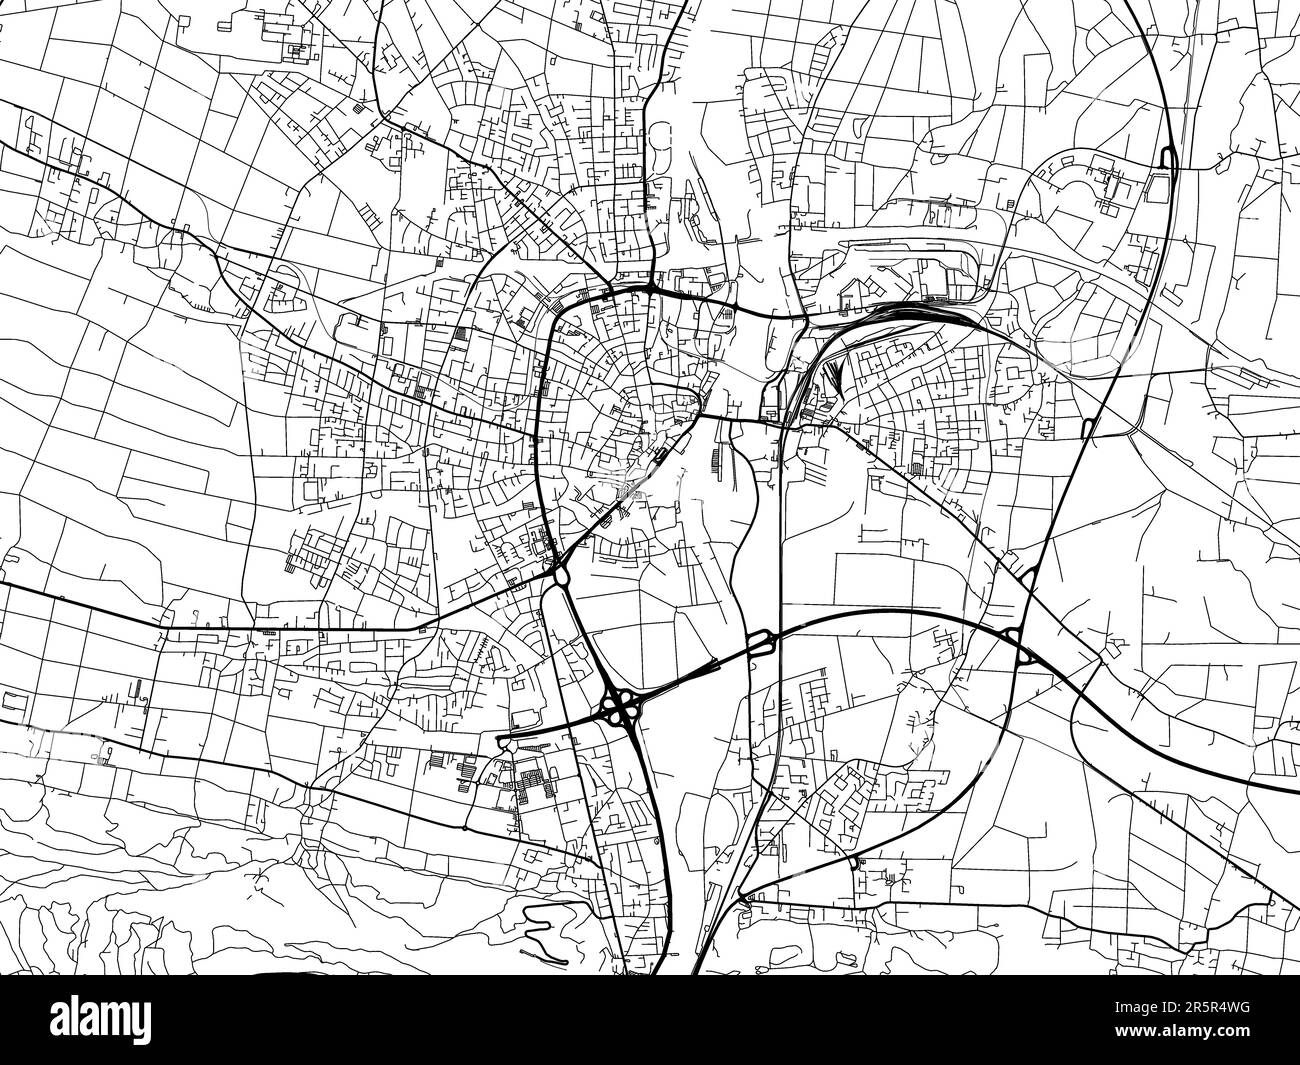 Vector road map of the city of  Minden in Germany on a white background. Stock Photo